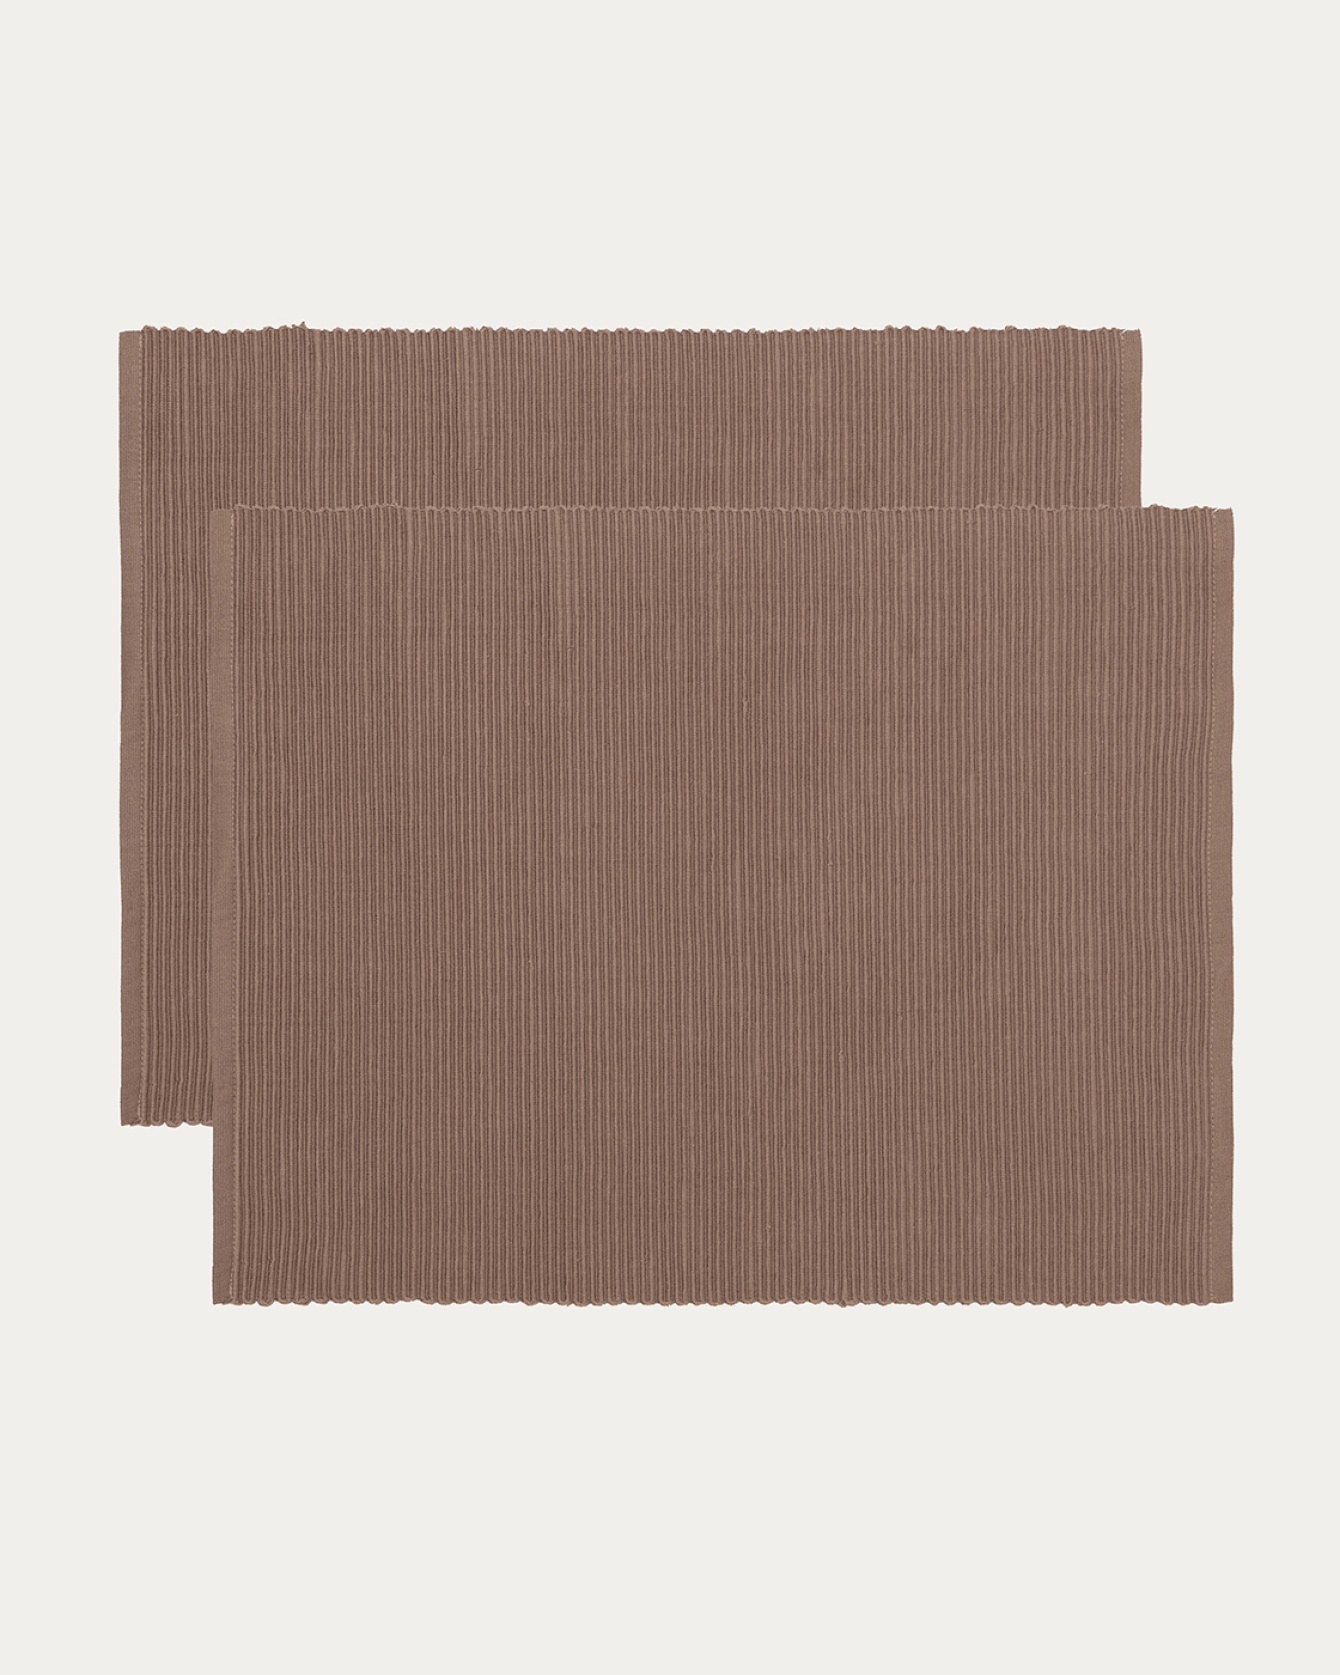 Product image dark mole brown UNI placemat made of soft cotton in ribbed quality from LINUM DESIGN. Size 35x46 cm and sold in 2-pack.